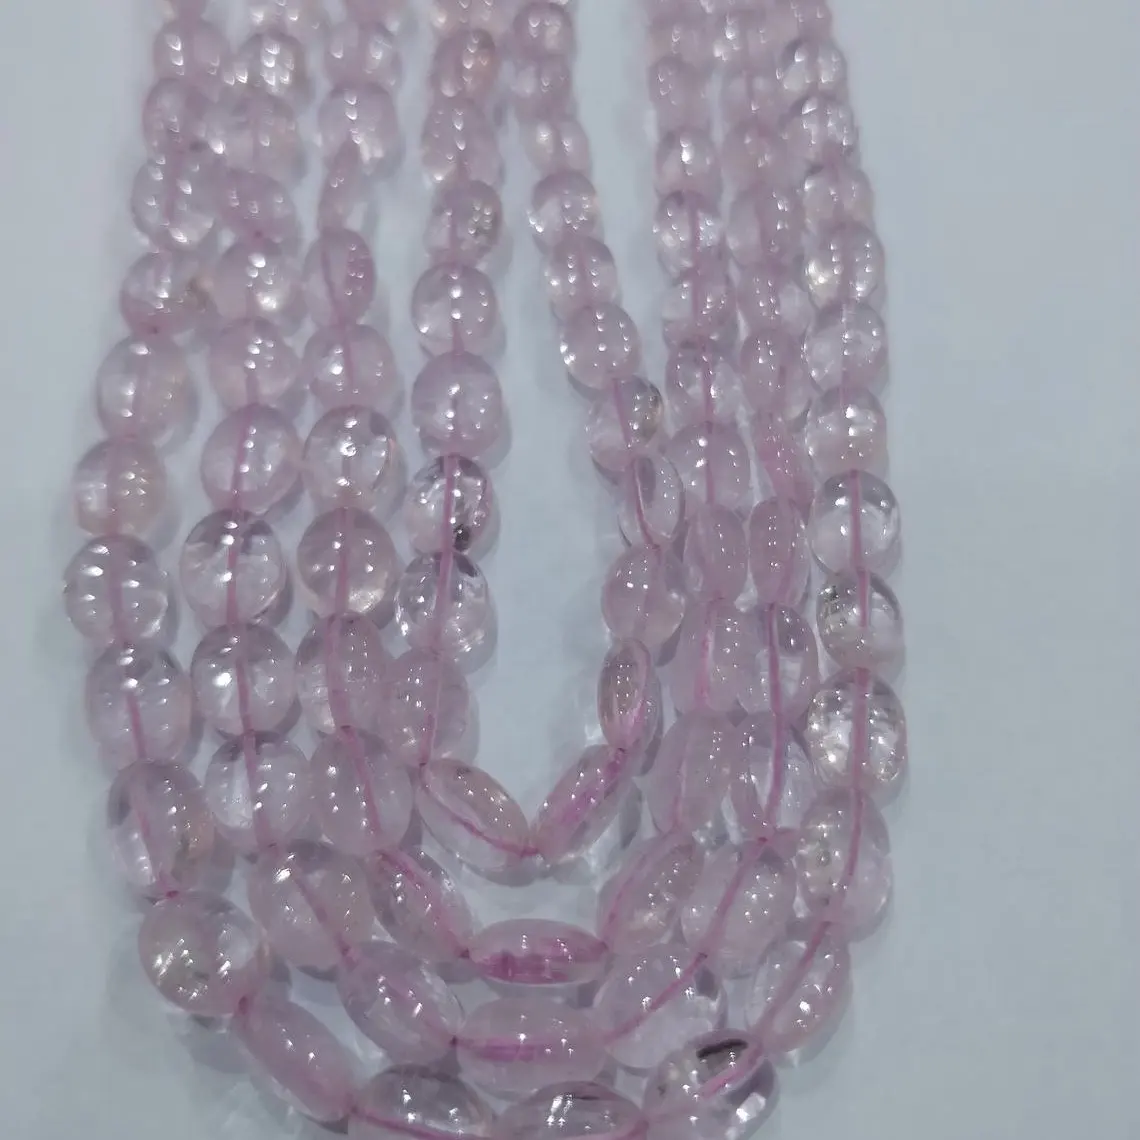 Shop Online Bulk Selling Natural Pink Morganite Extremely Fine Smooth Oval Stone Beads At Wholesale Best Price From Supplier